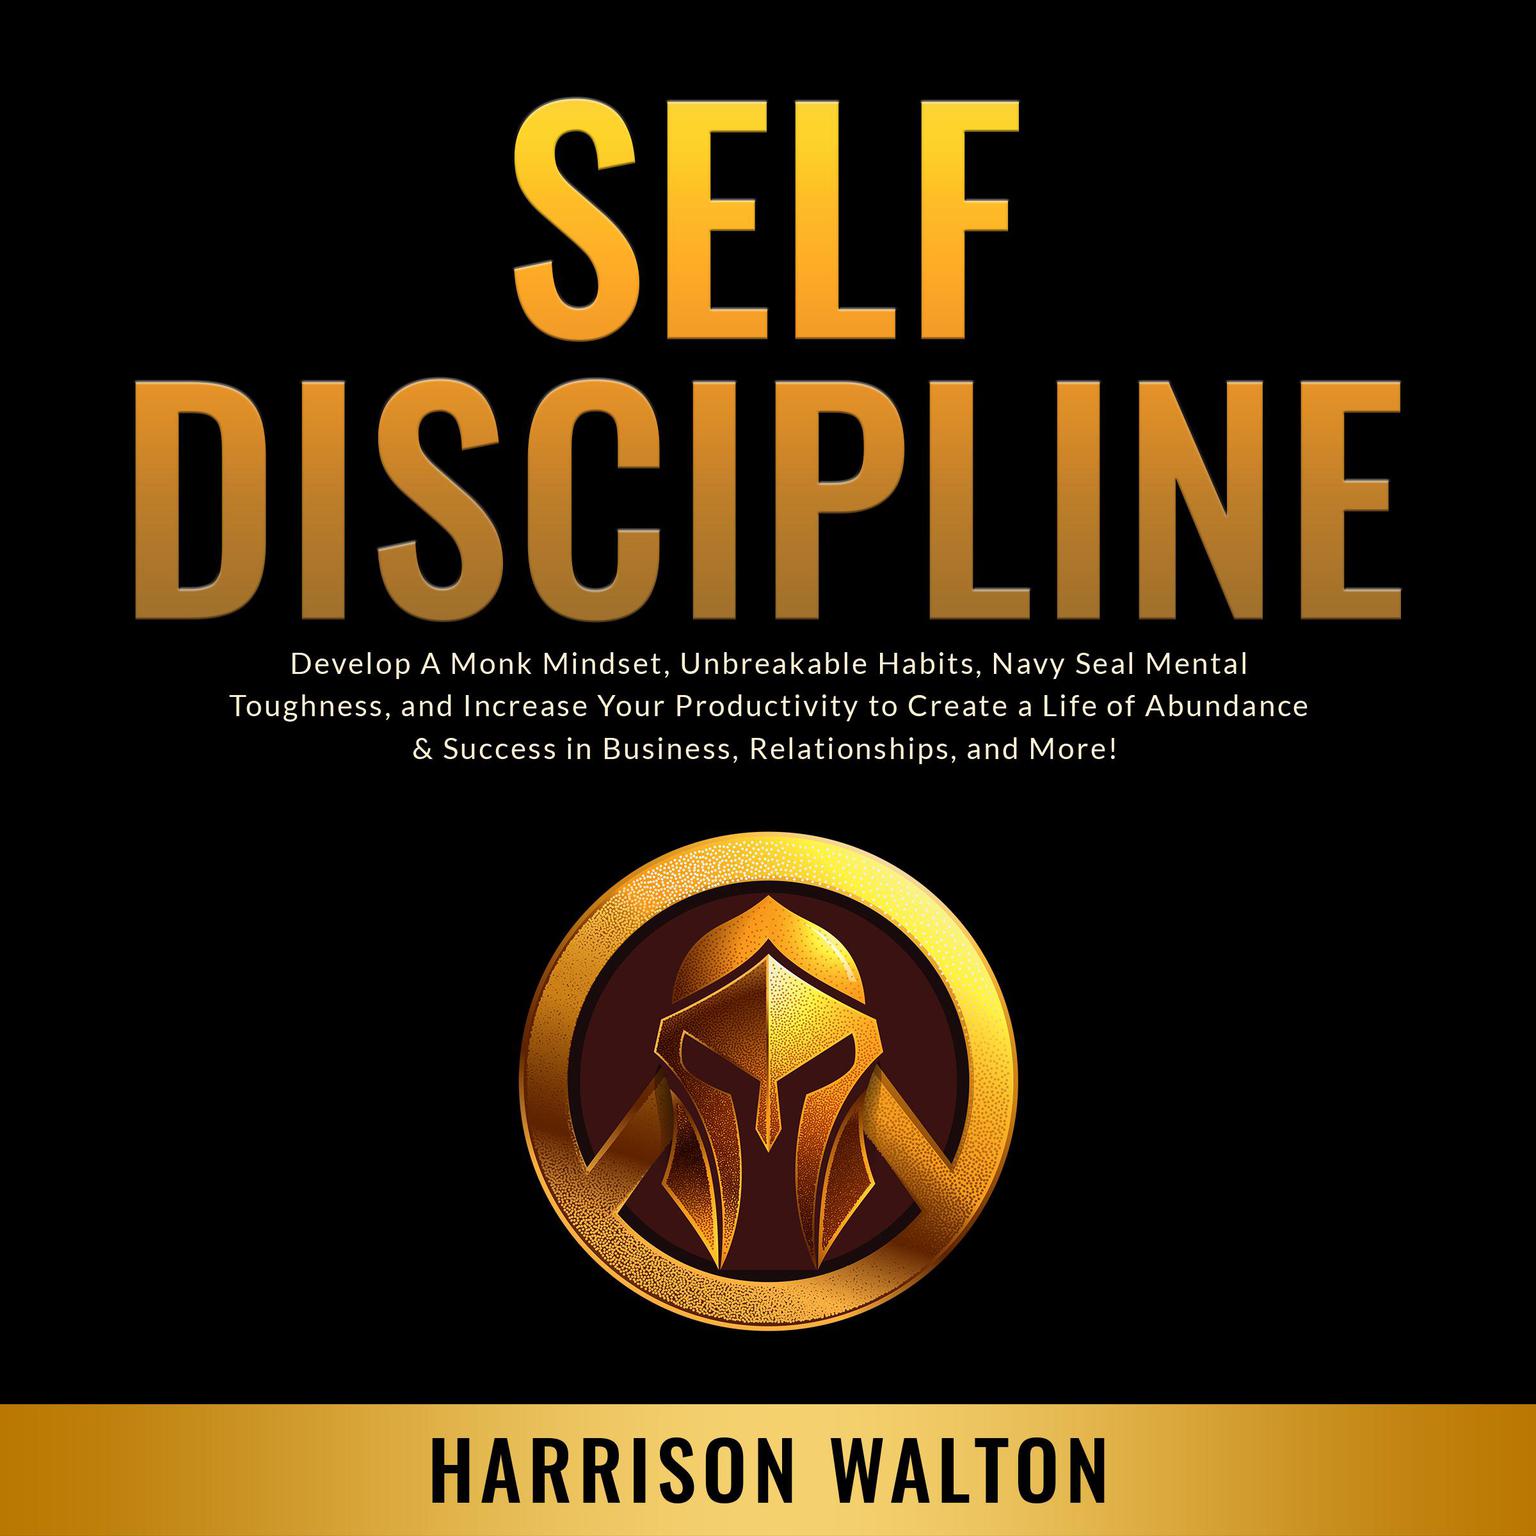 Self-Discipline: Develop A Monk Mindset, Unbreakable Habits, Navy Seal Mental Toughness, and Increase Your Productivity to Create a Life of Abundance & Success in Business, Relationships, and More! Audiobook, by Harrison  Walton